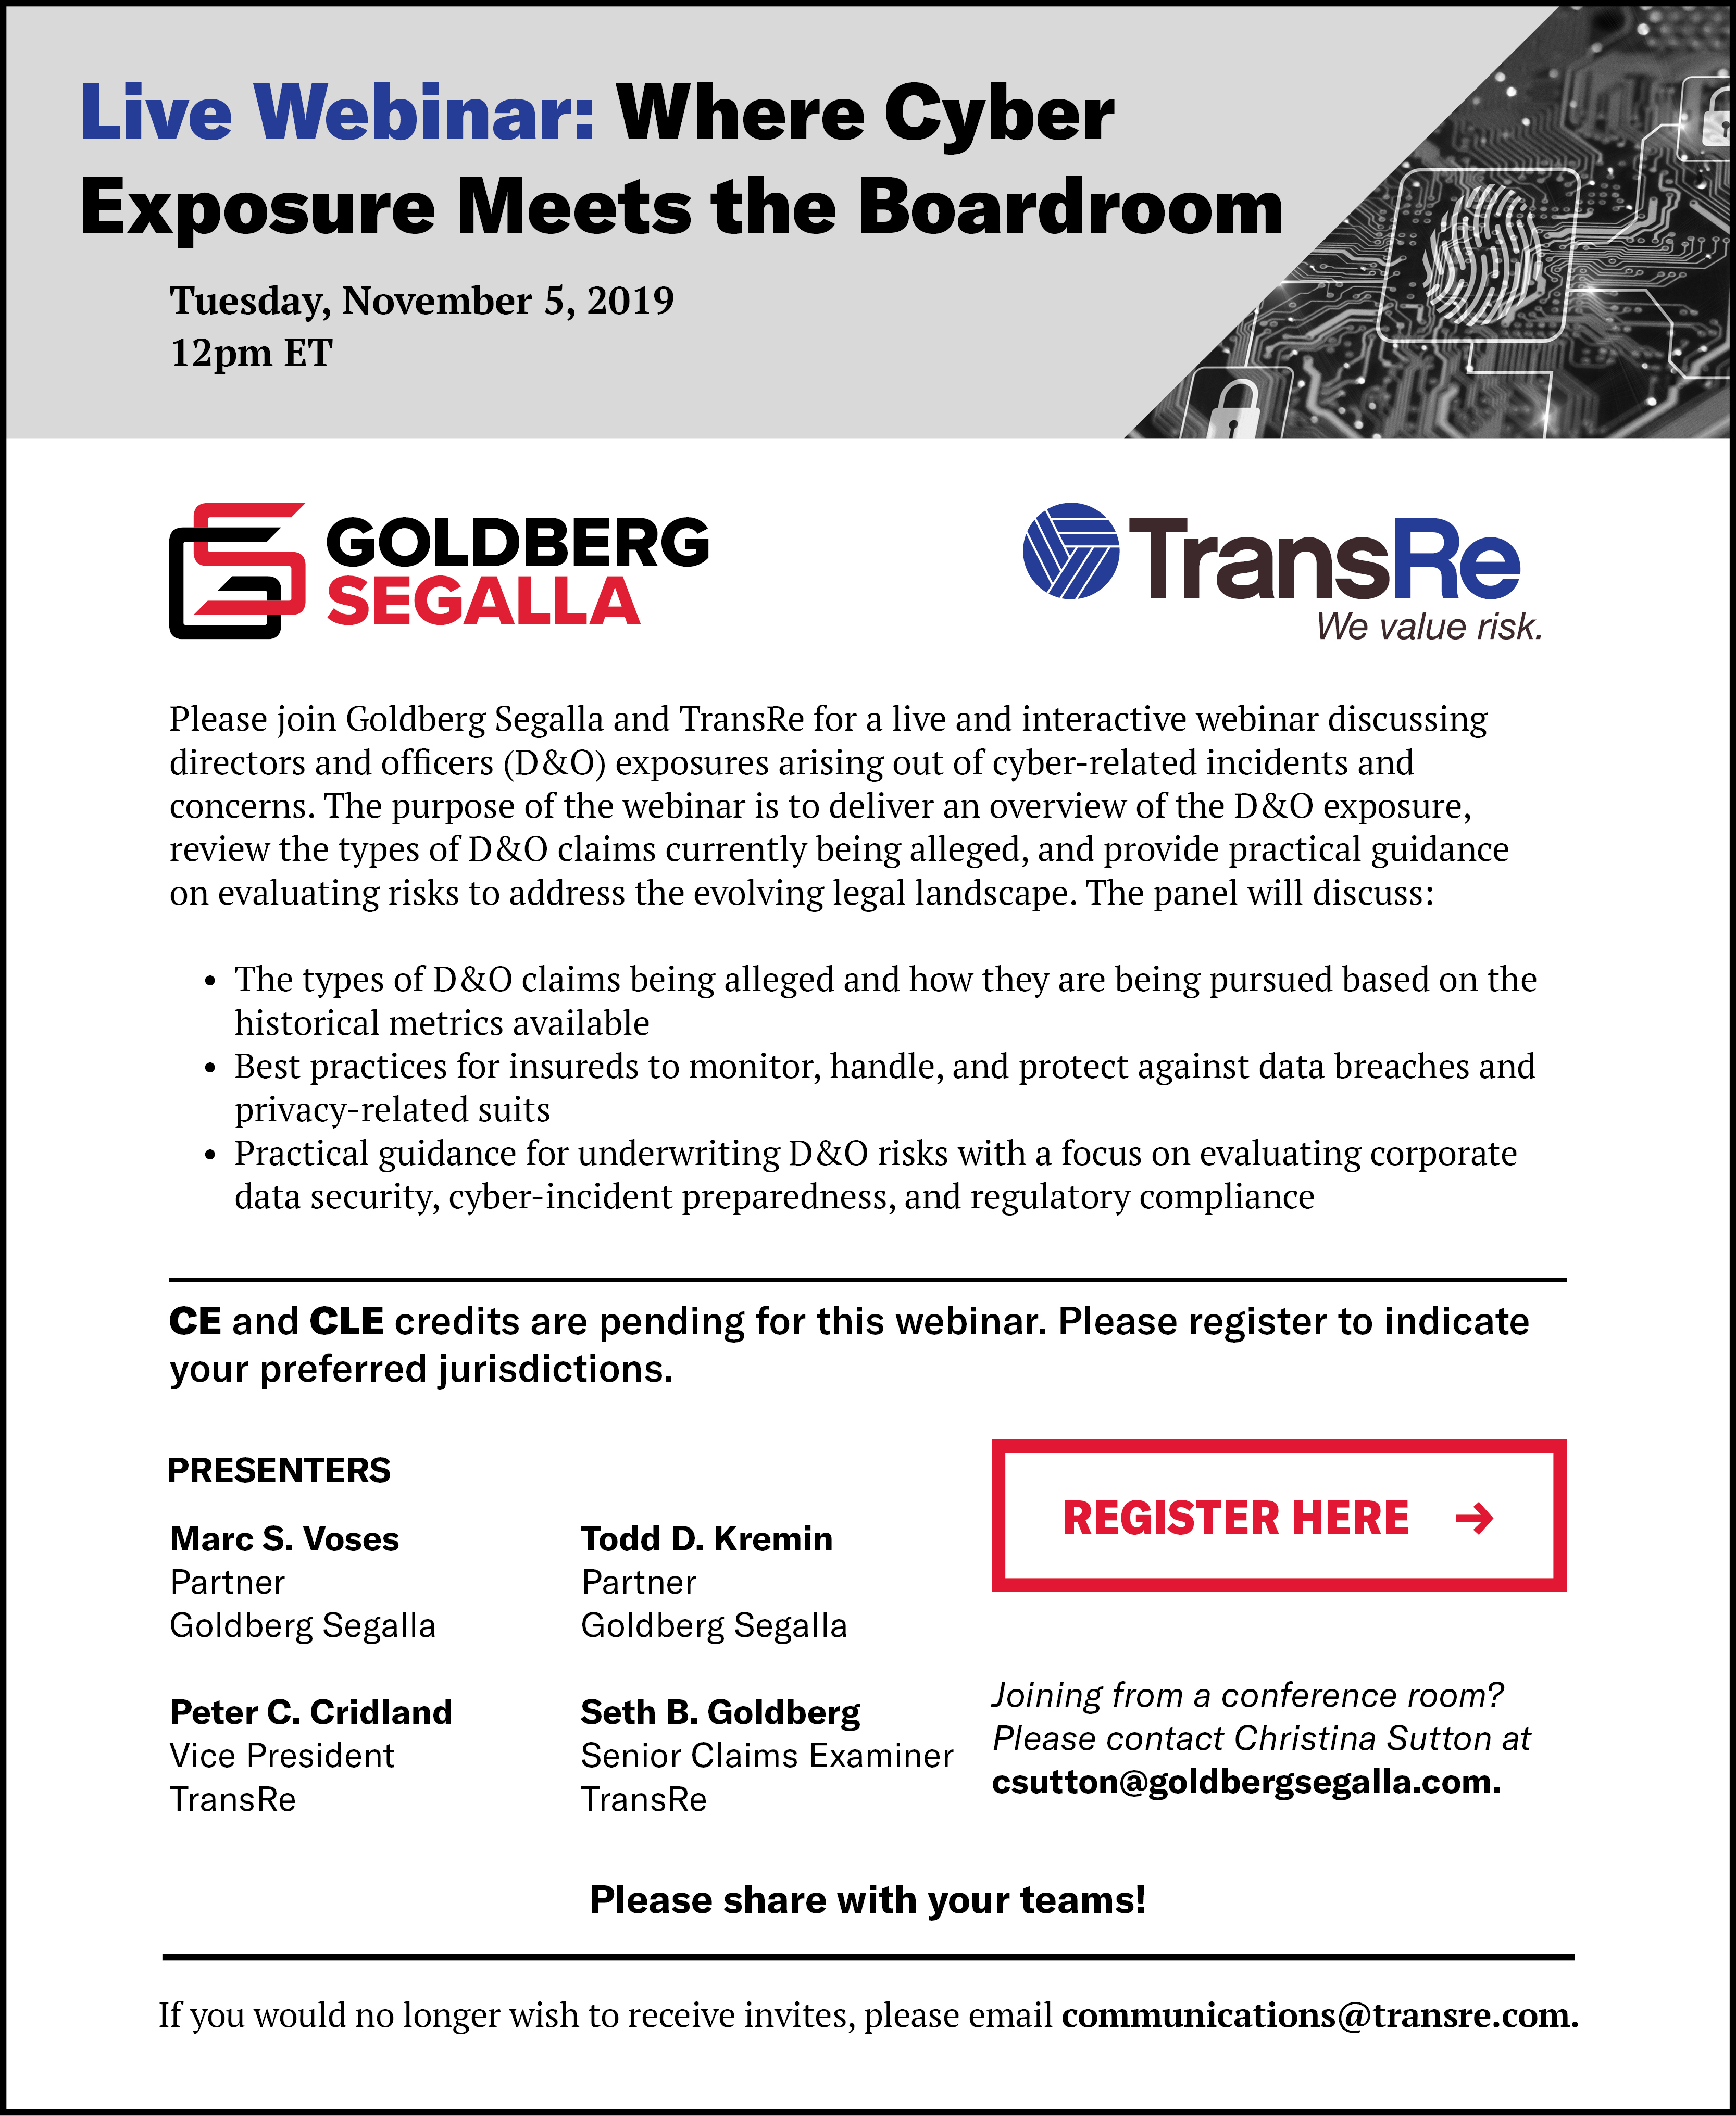 Register for the Live Webinar: Where Cyber Exposure Meets the Boardroom